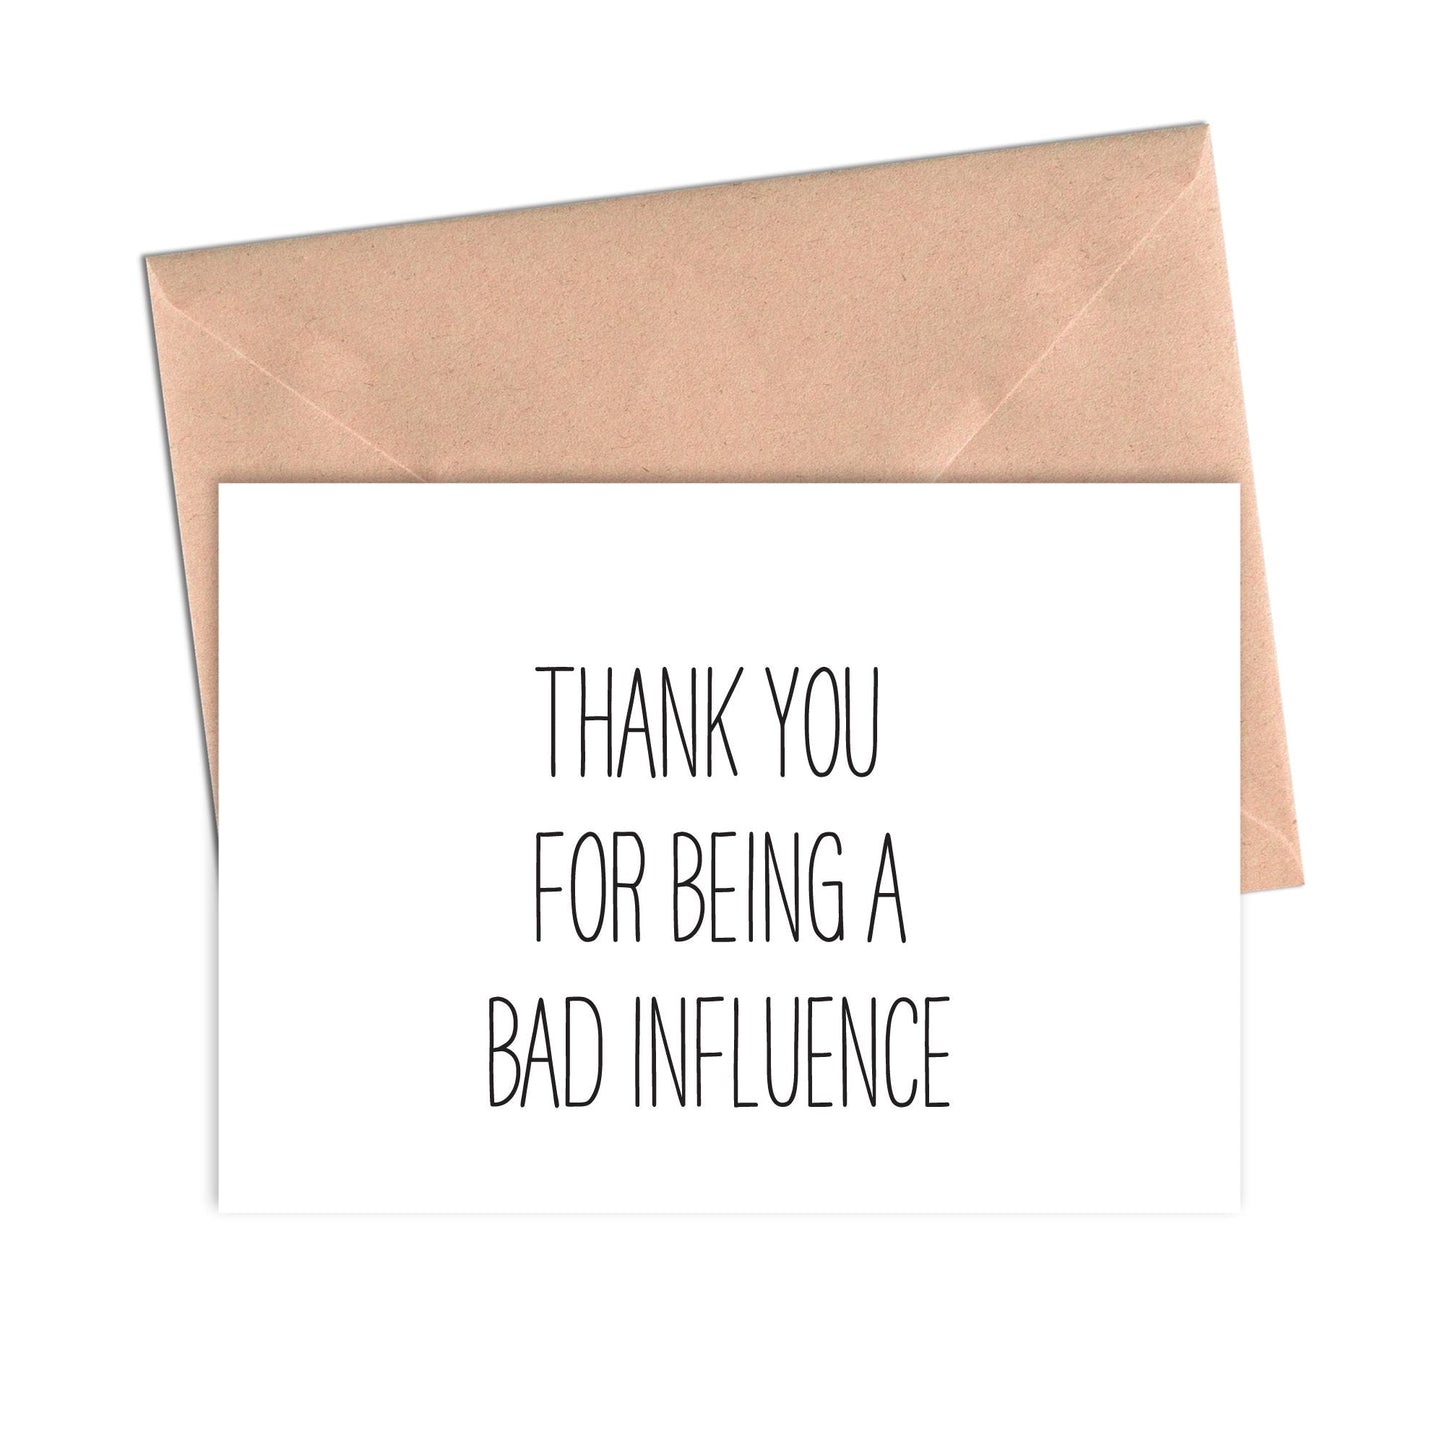 Bad Influence Funny Friendship Card